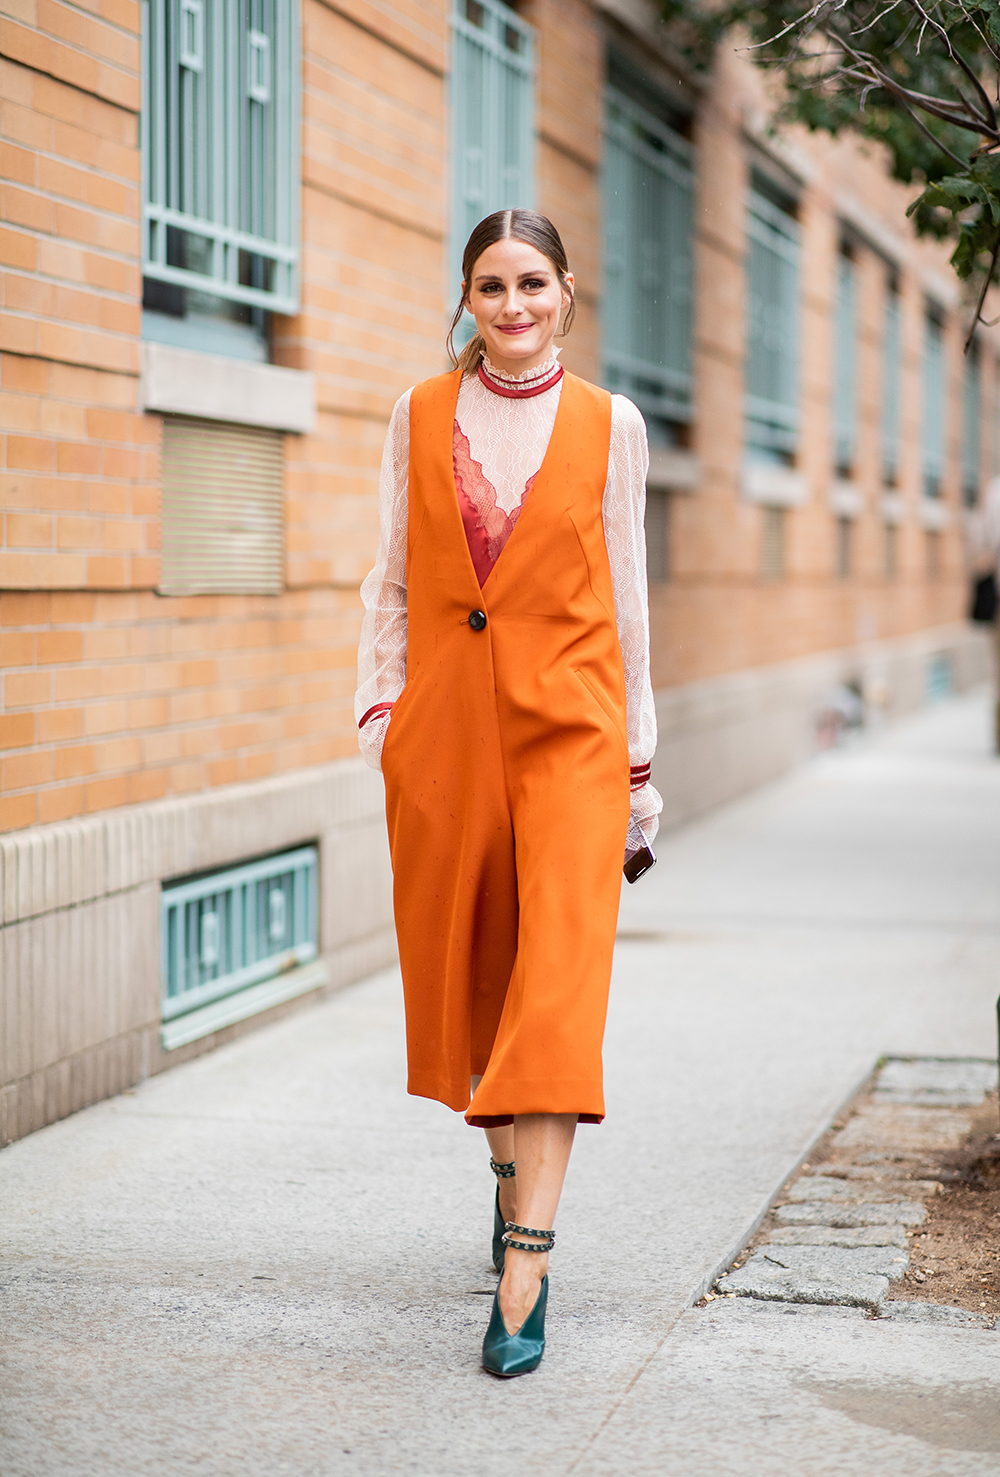 NEW YORK, NY - SEPTEMBER 08: Olivia Palermo is seen outside Jonathan Simkhai during New York Fashion Week Spring/Summer 2019 on September 8, 2018 in New York City. (Photo by Christian Vierig/Getty Images)